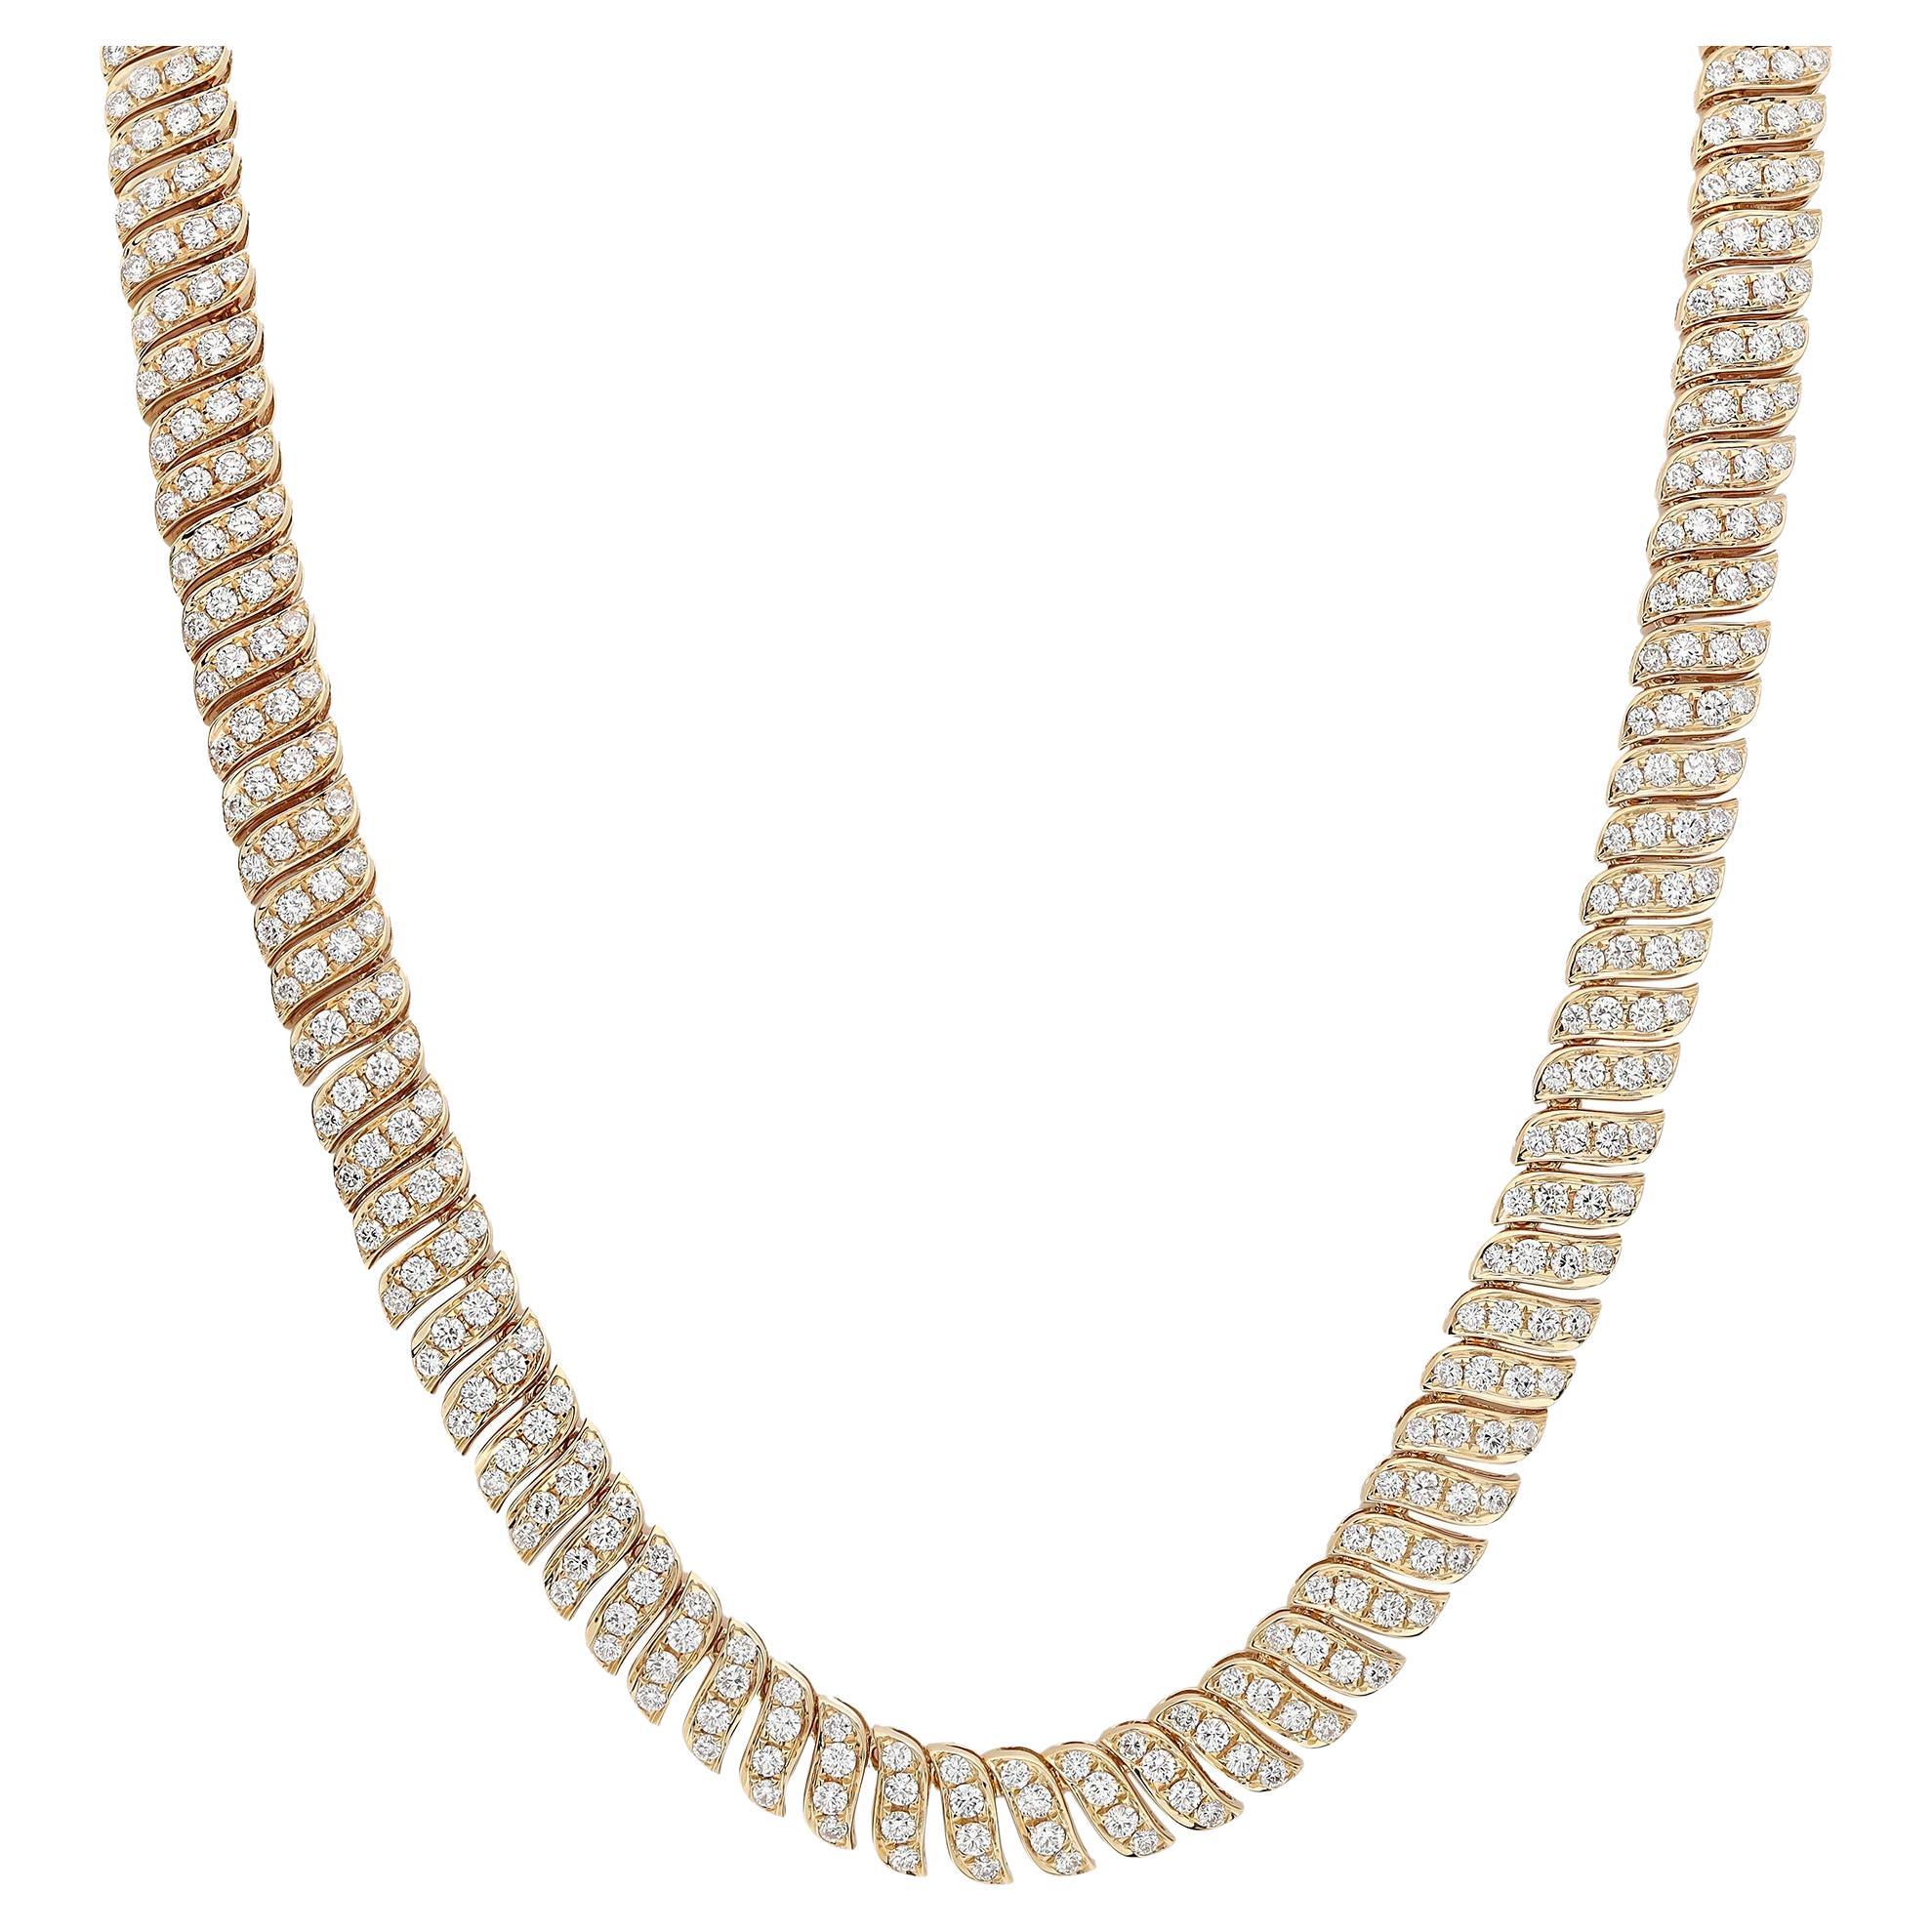 8.31Cttw Round Cut Diamond Statement Necklace 18K Yellow Gold 16 Inches For Sale